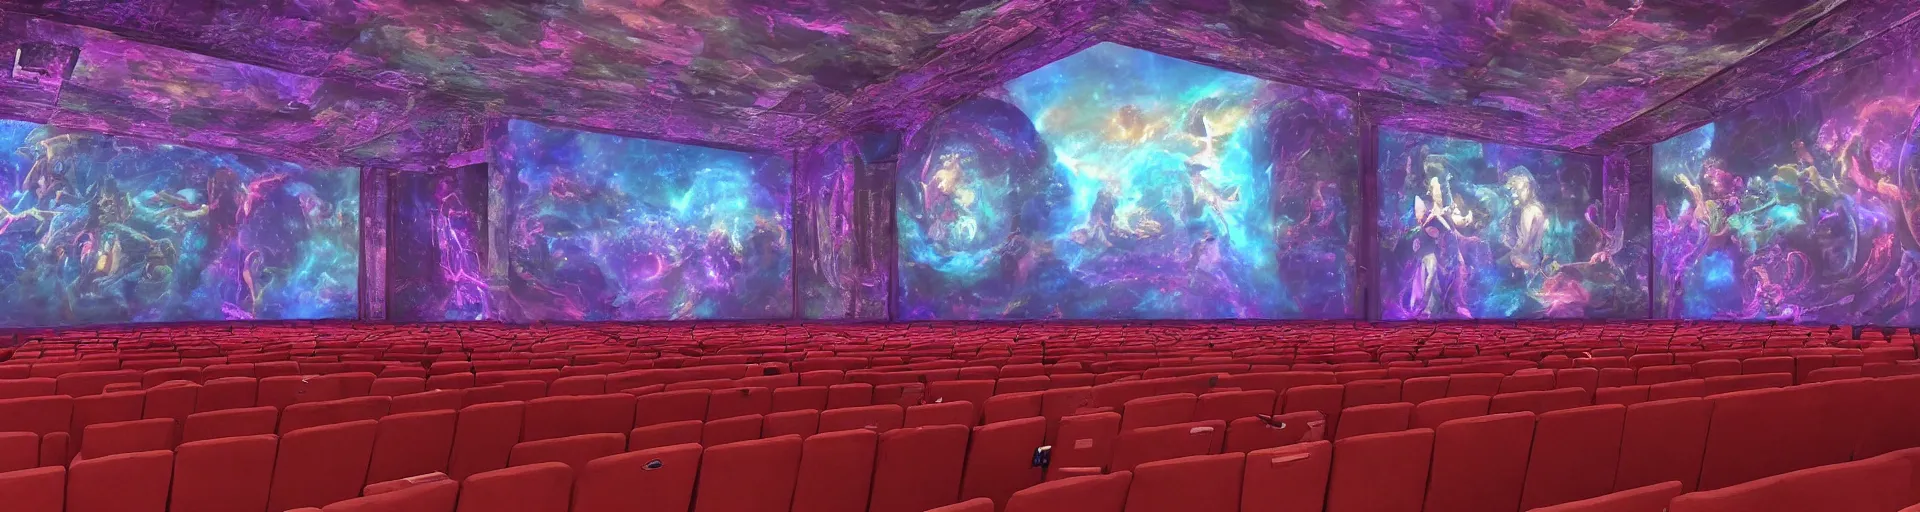 Image similar to Inside an astral theater with seats and screens